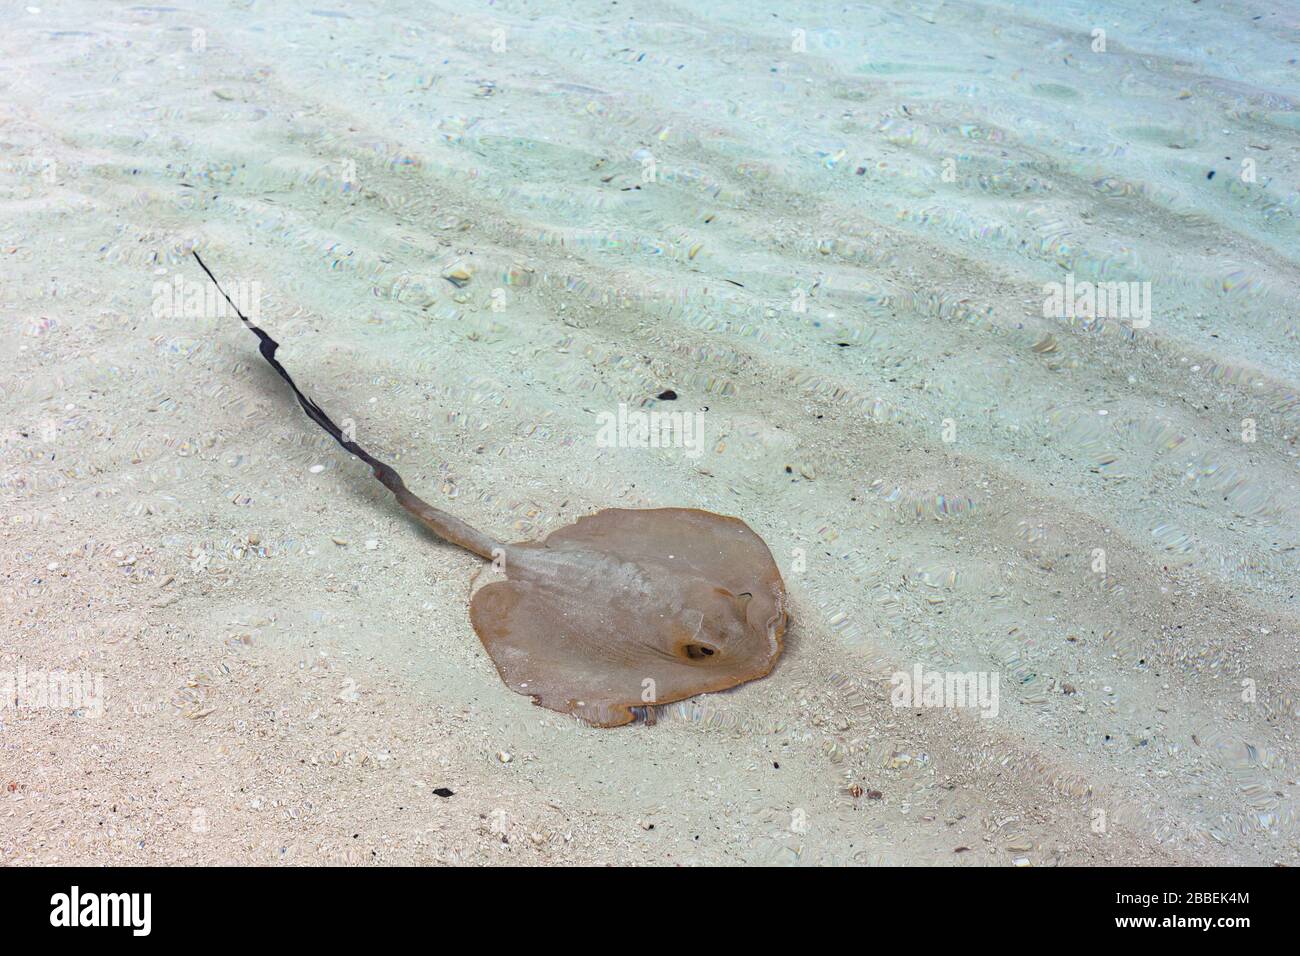 Stingray in clear shallow water of blue lagoon paradise beach white sand Stock Photo